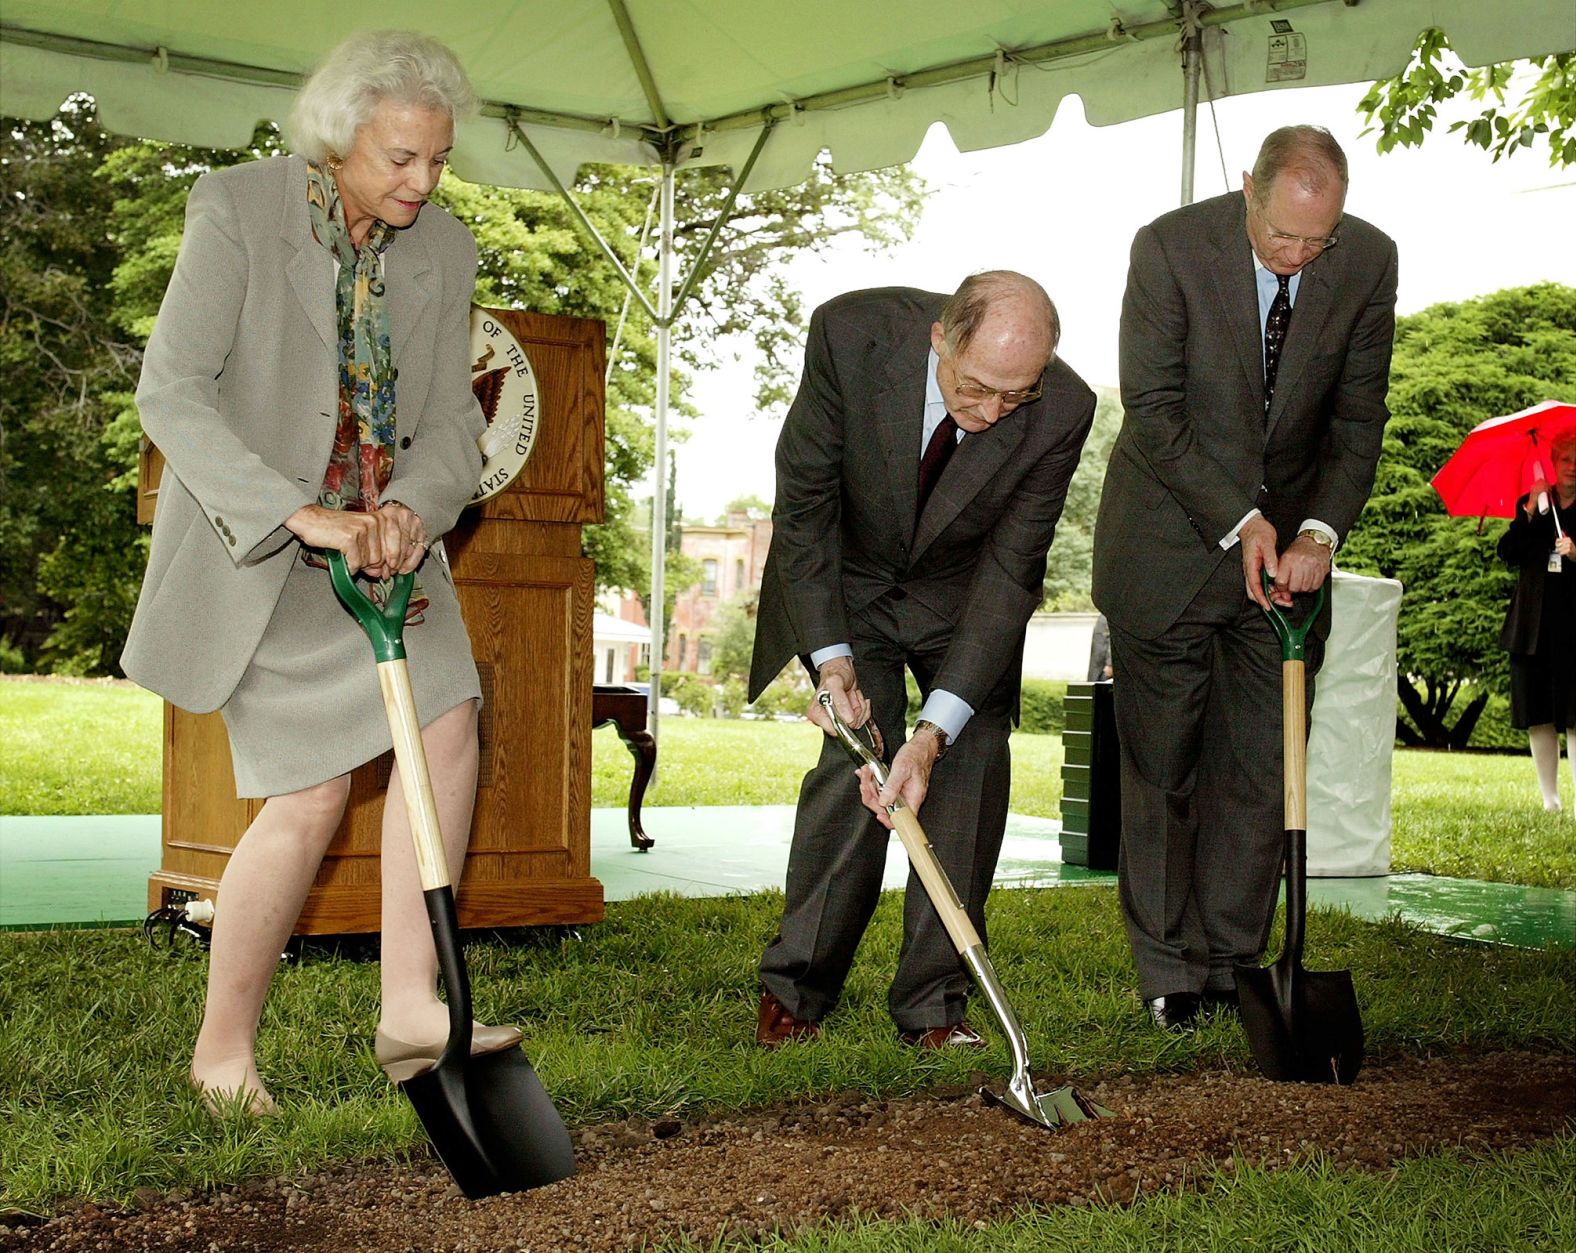 From left, O'Connor, Chief Justice William Rehnquist and Justice Anthony Kennedy take part in a groundbreaking ceremony at the Supreme Court in 2003. The court's facilities were being modernized.